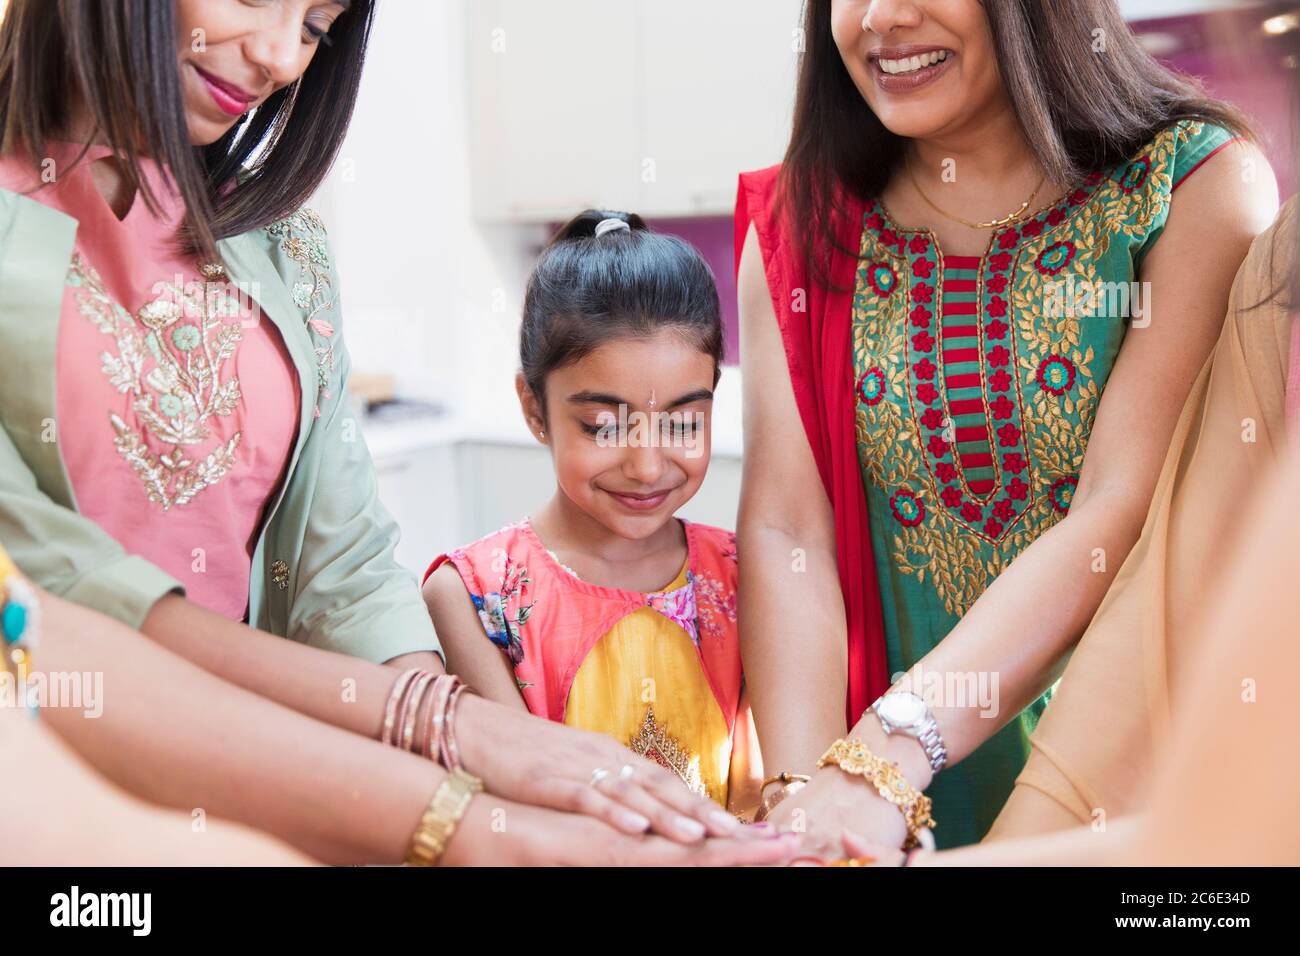 Indian women and girl in saris joining hands Stock Photo